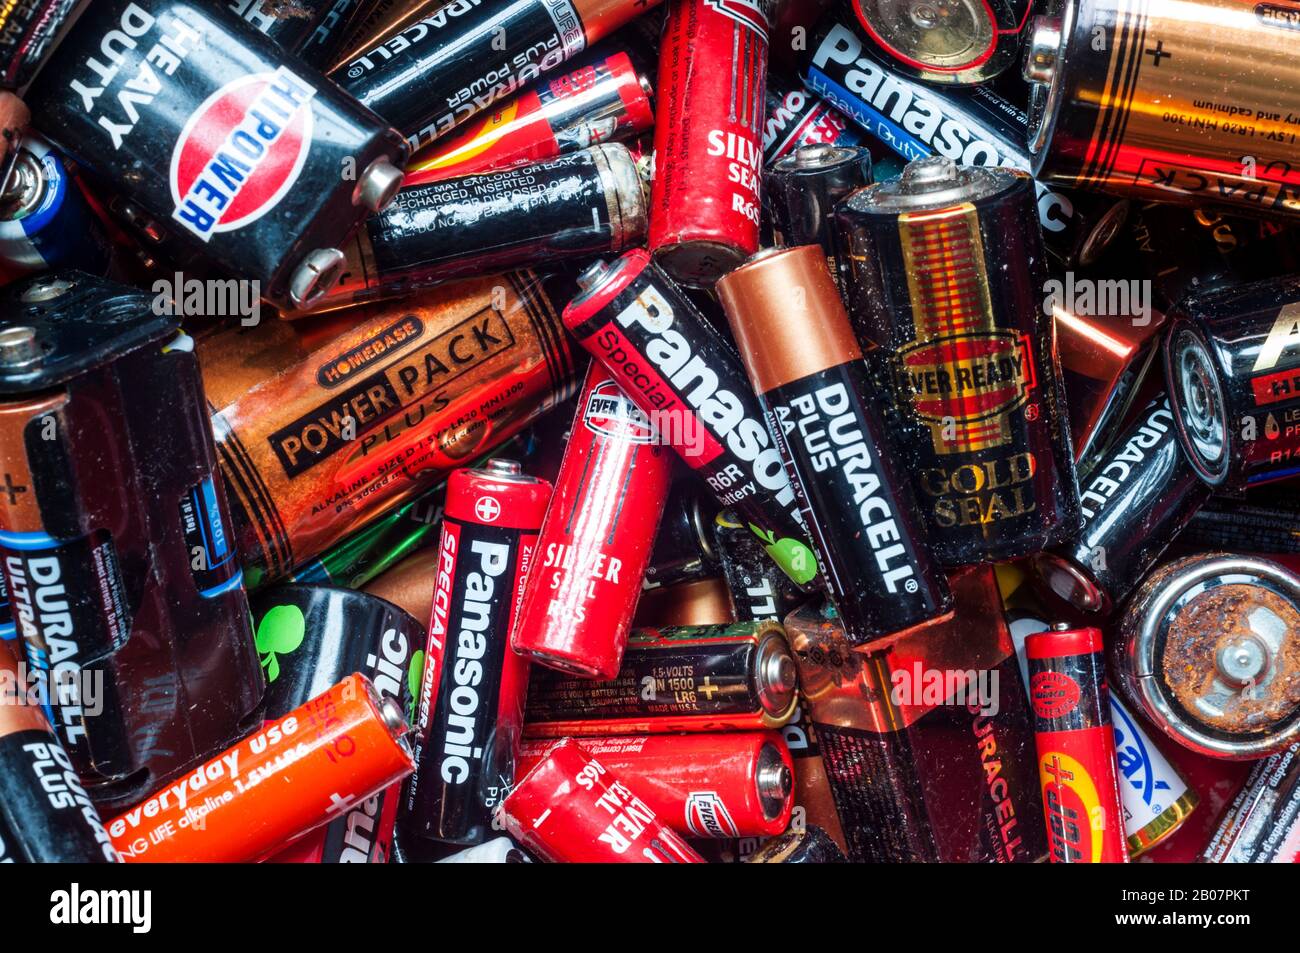 A collection of old leaking batteries to be recycled. Stock Photo